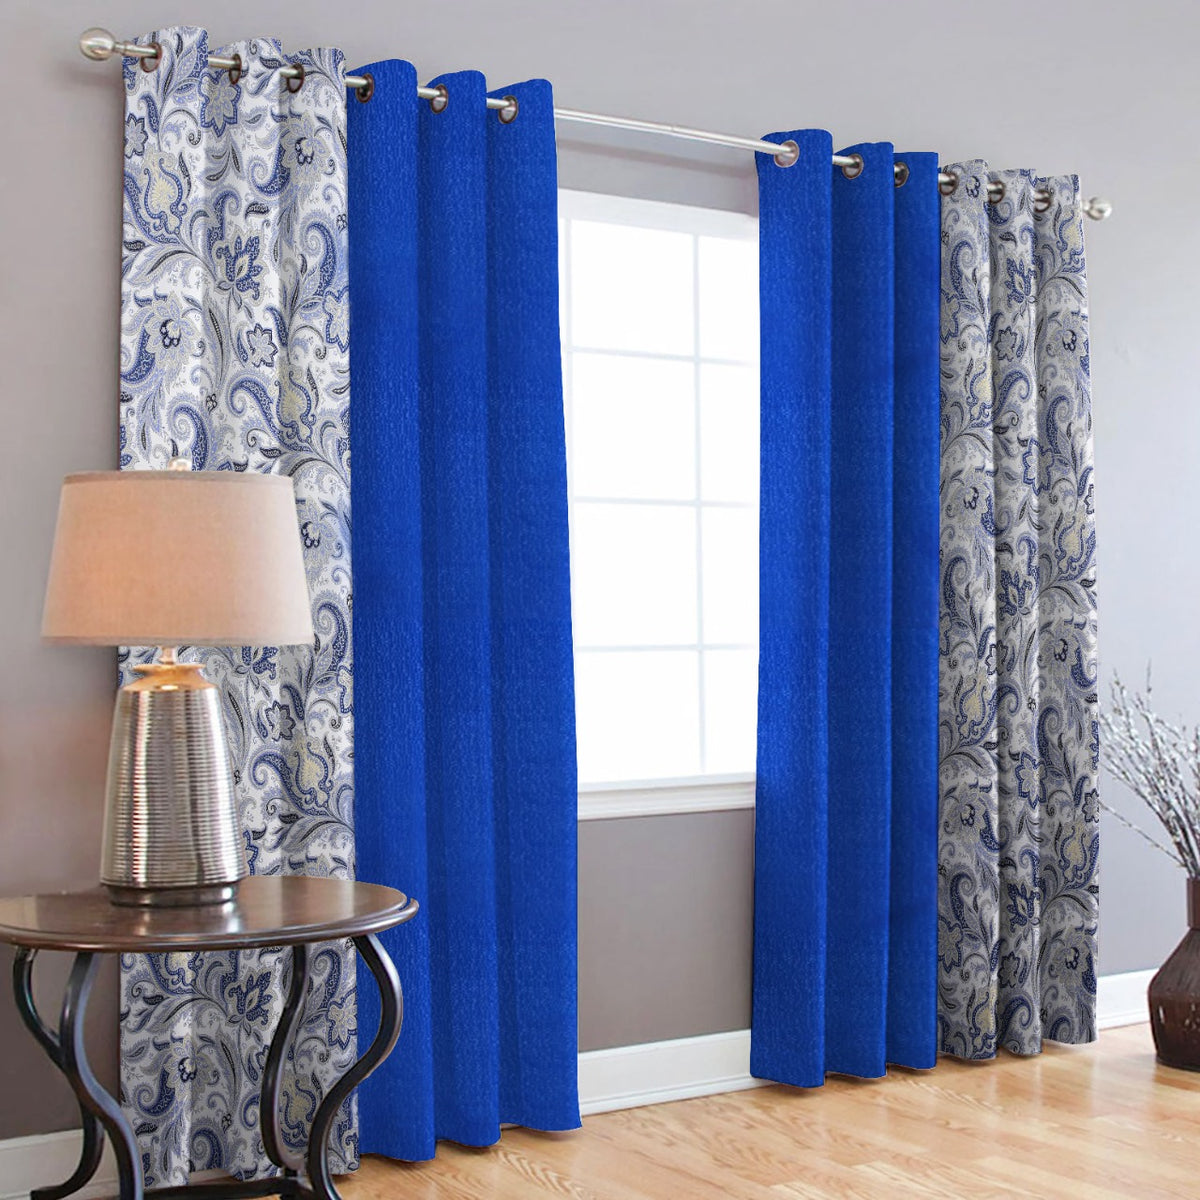 2 Tone Premium Curtains With Lining